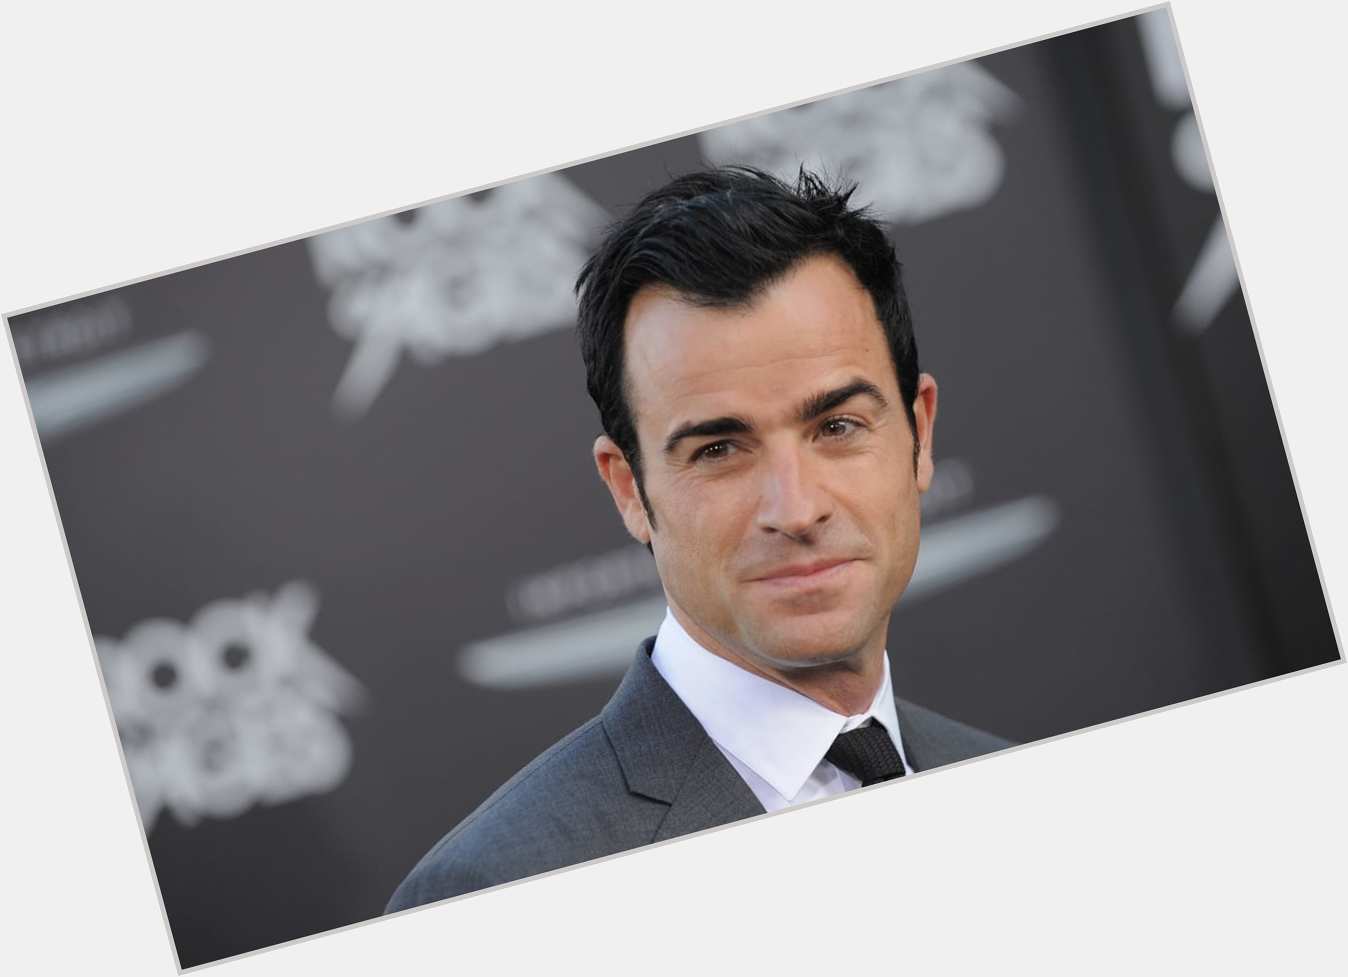 Happy birthday to 1/2 of one our favorite couples, Justin Theroux! 